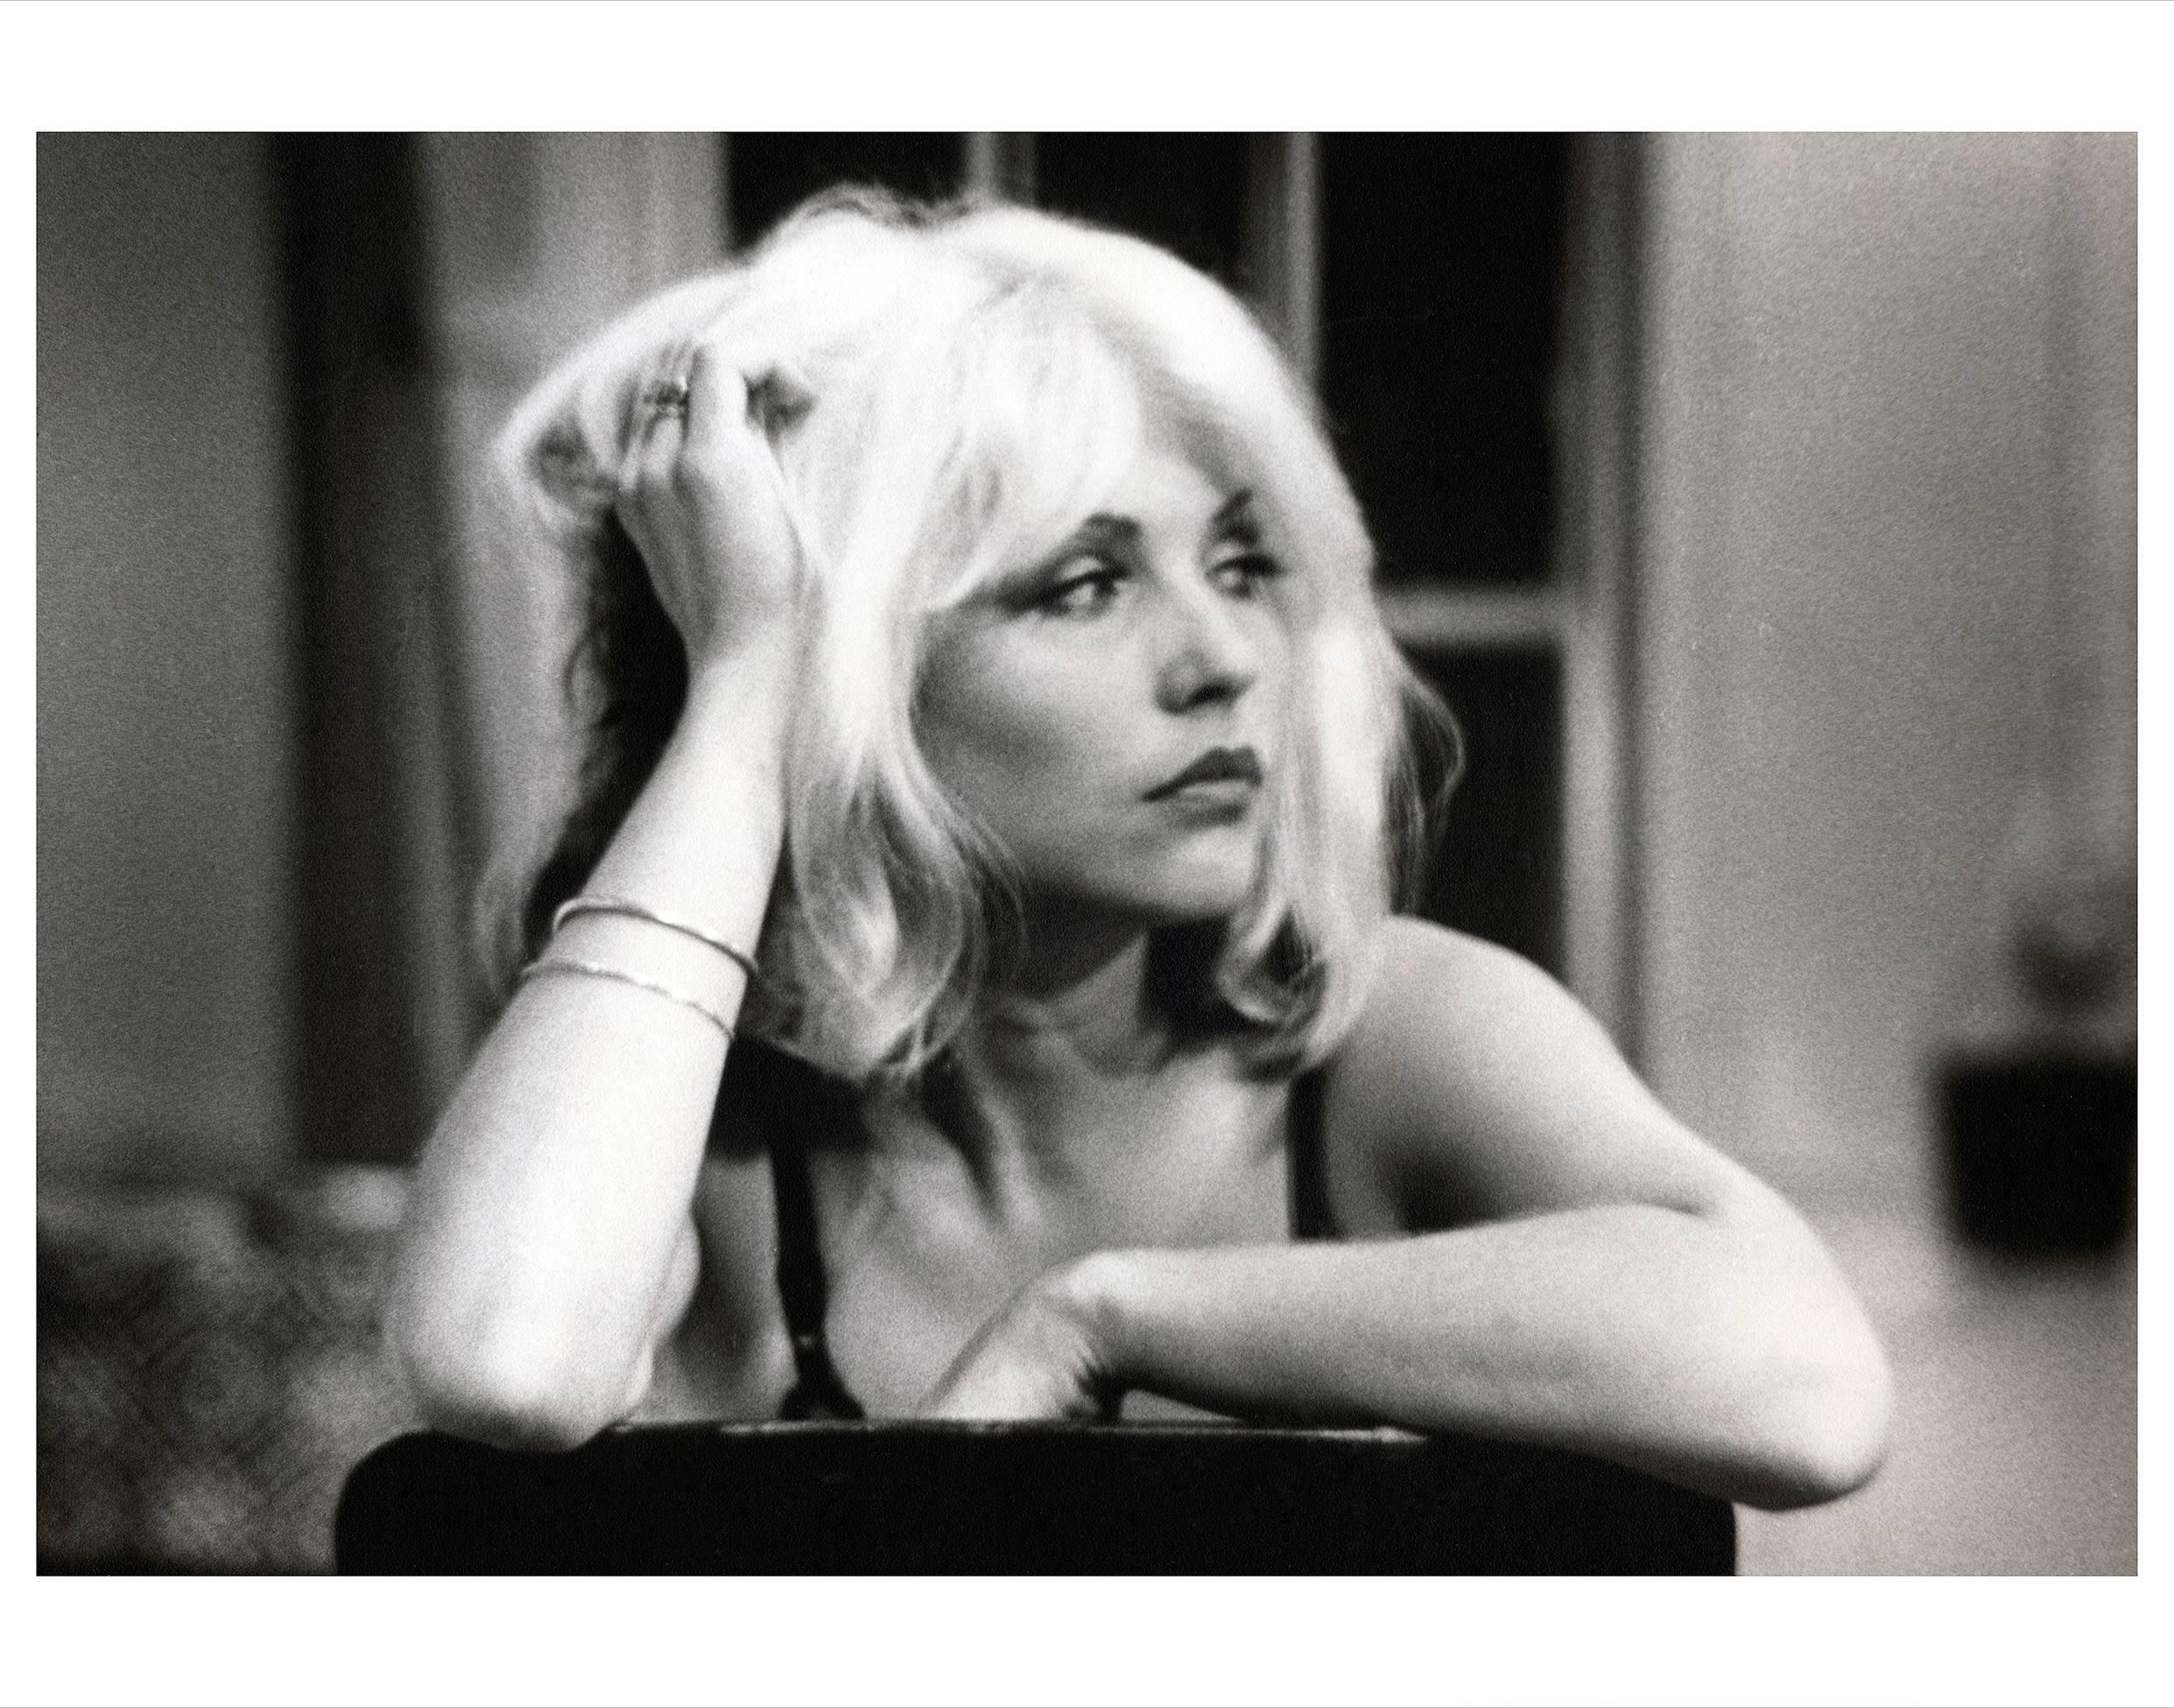 Debbie Harry photograph (on the set of Unmade Beds), New York, 1976